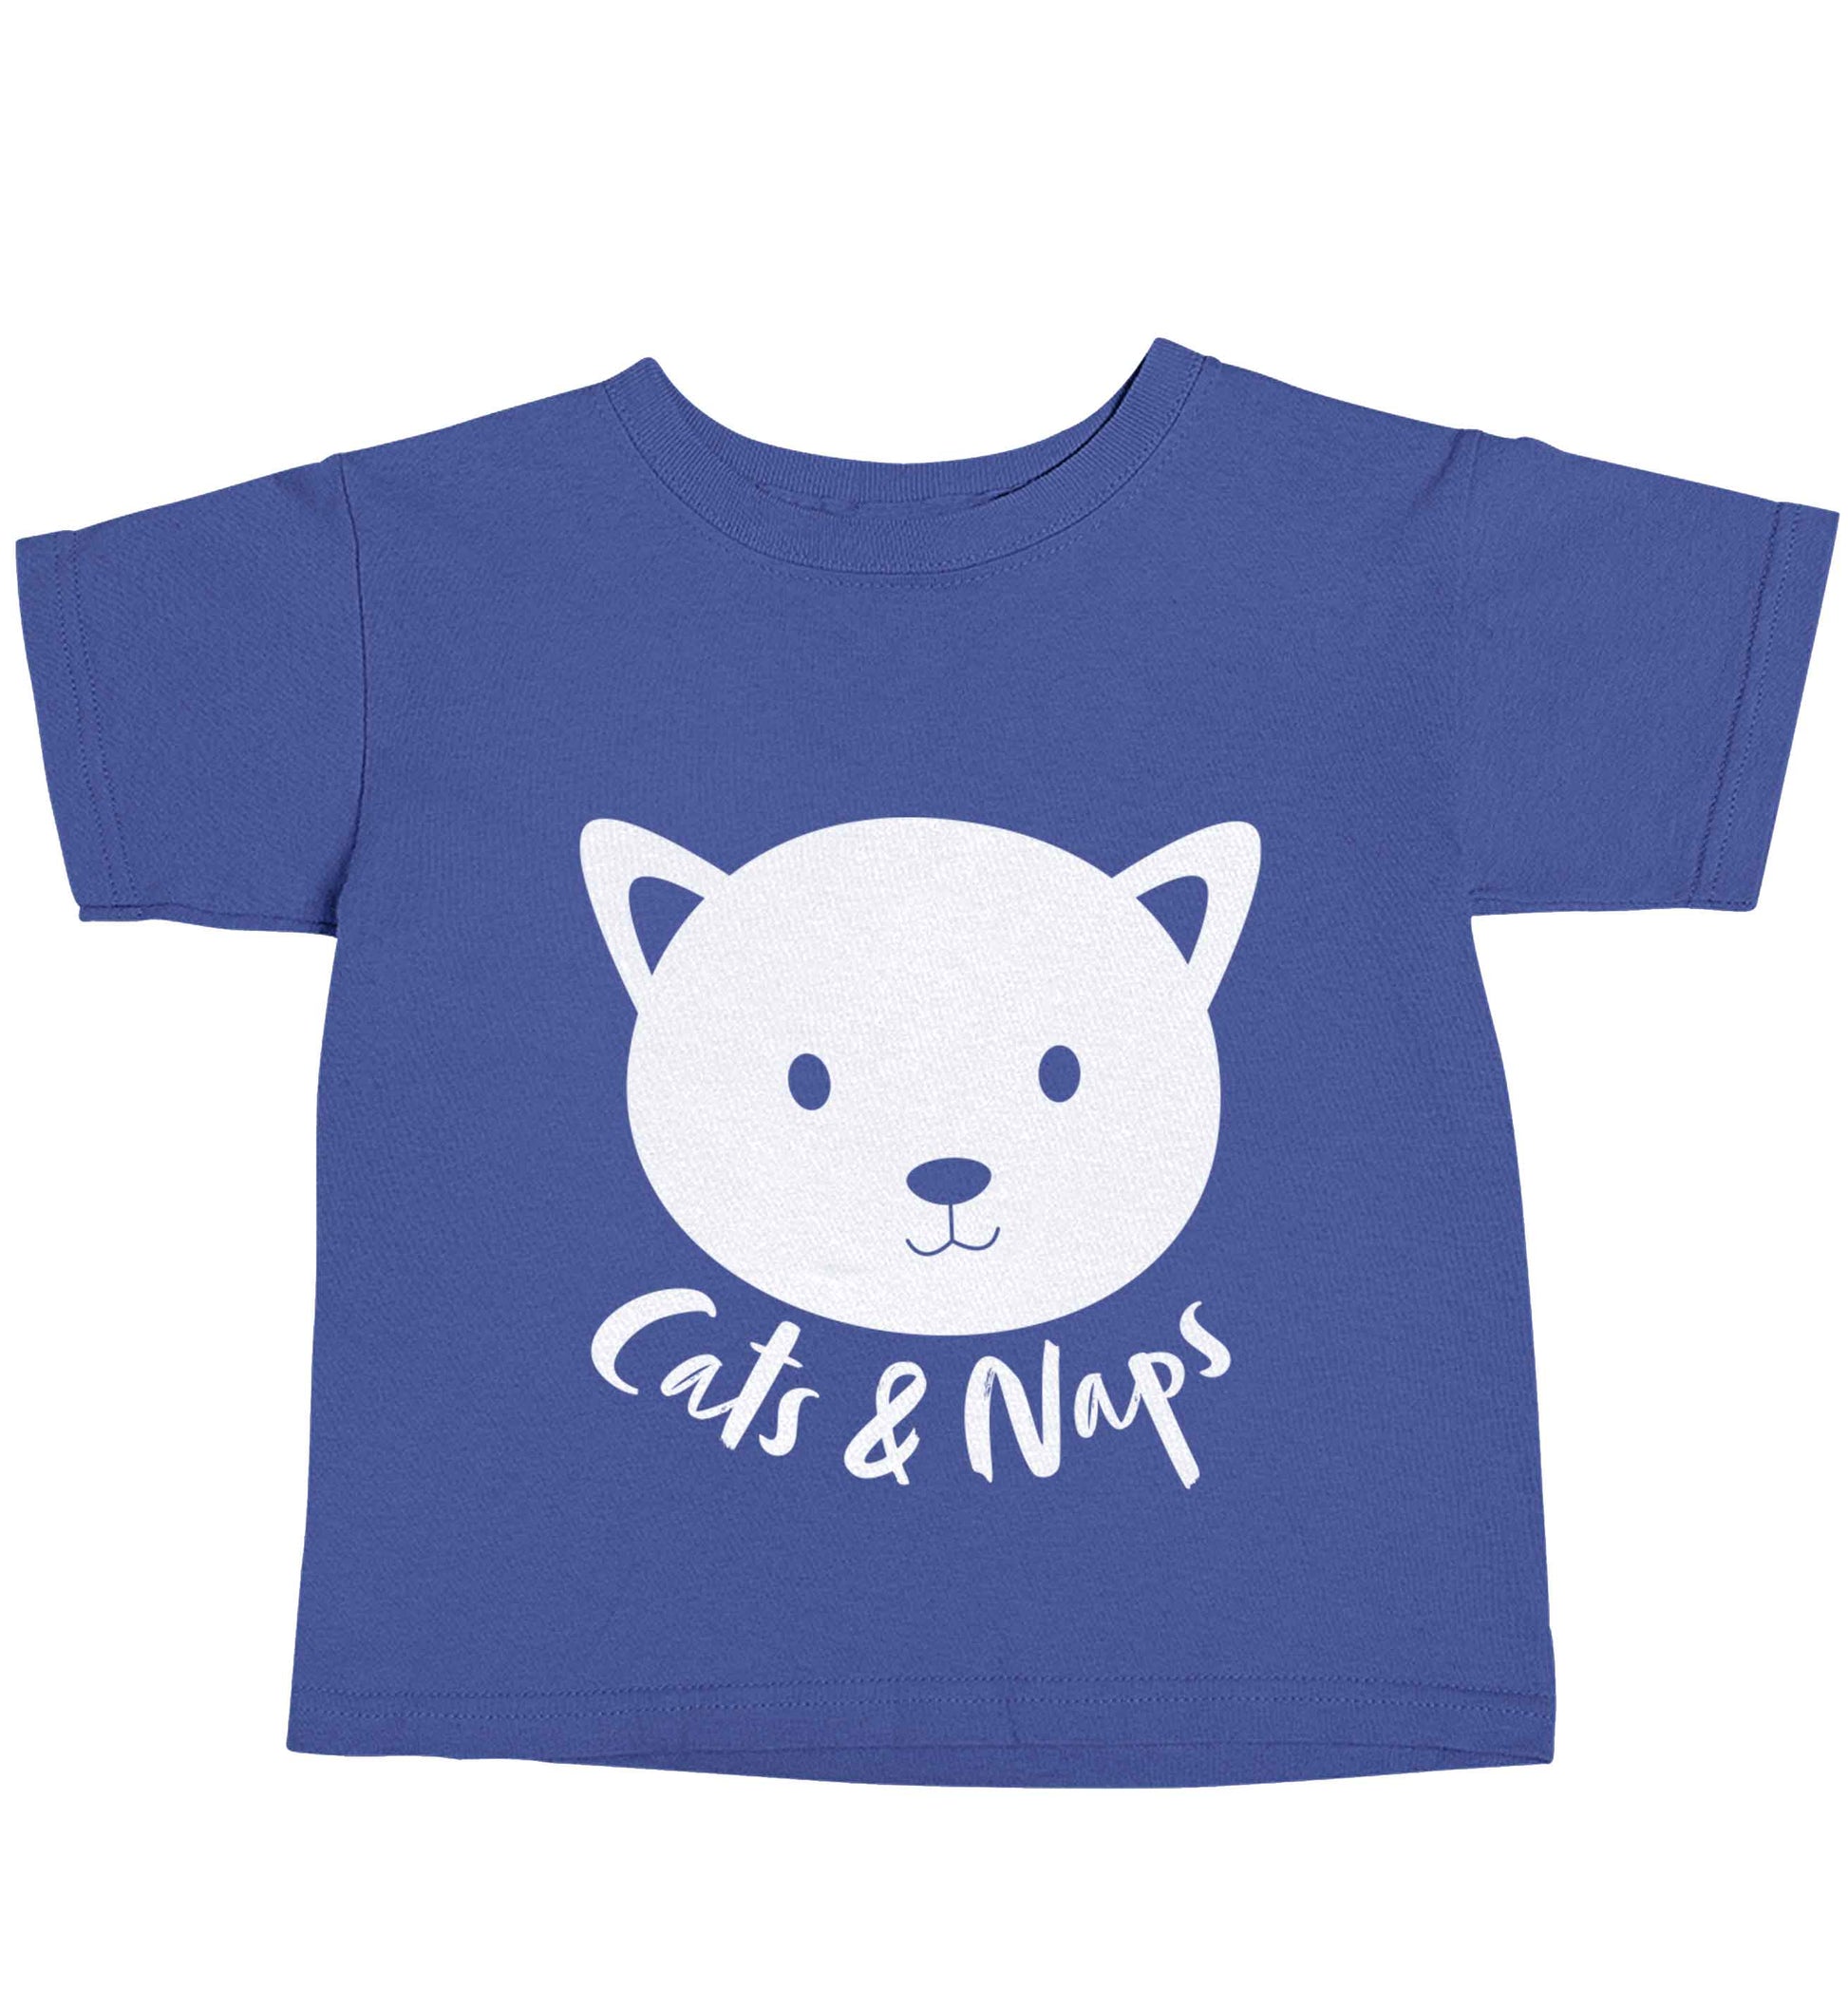 Cats and naps Kit blue baby toddler Tshirt 2 Years